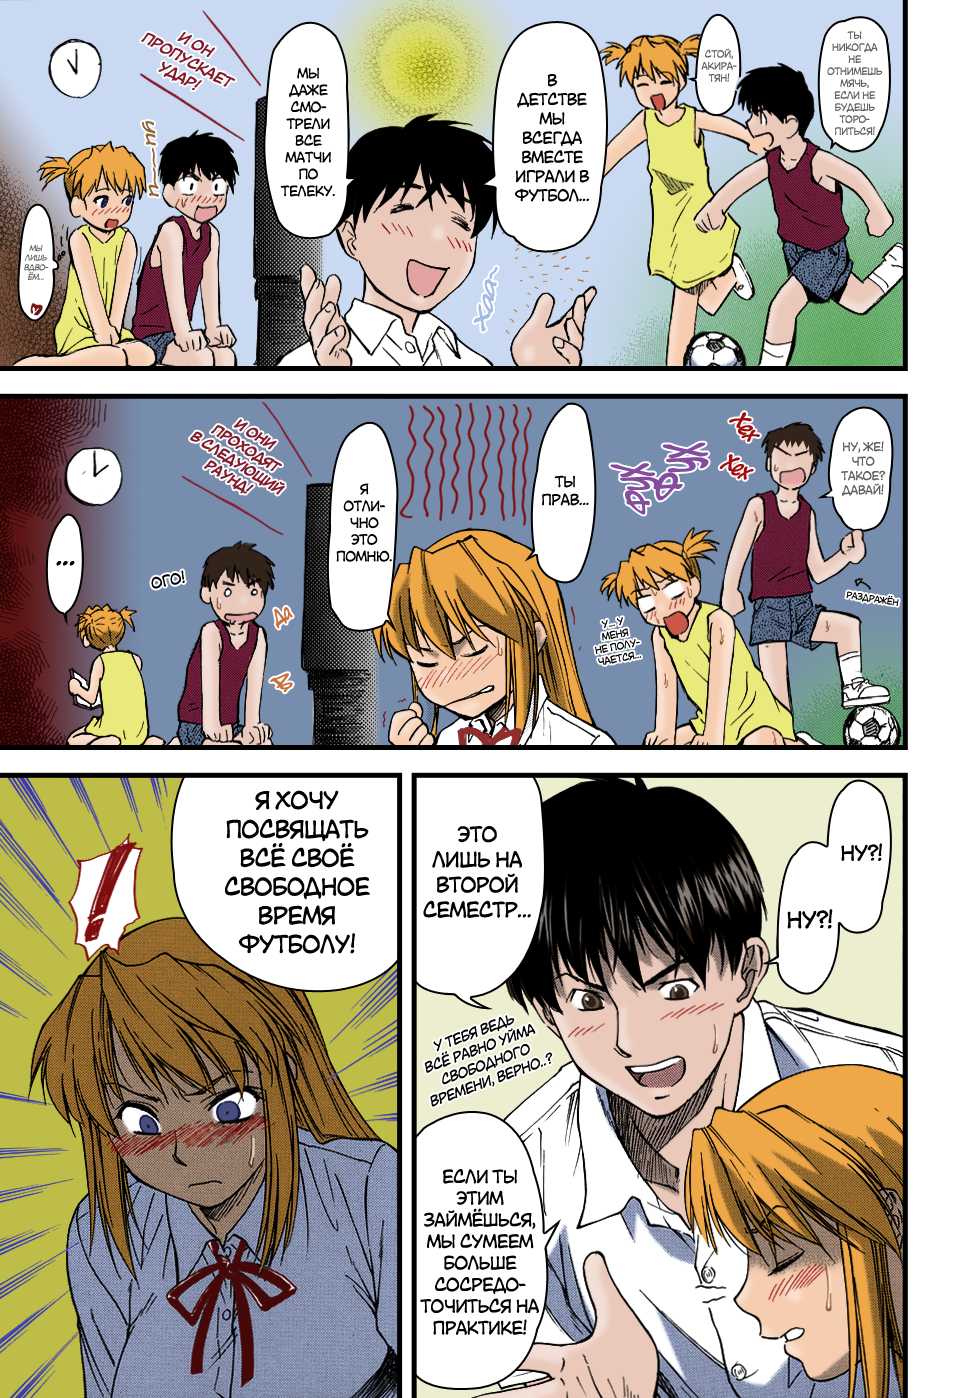 [Nagare Ippon] Offside Girl Ch. 1-5 [Russian] [Colorized] [Decensored] [WIP] - Page 10